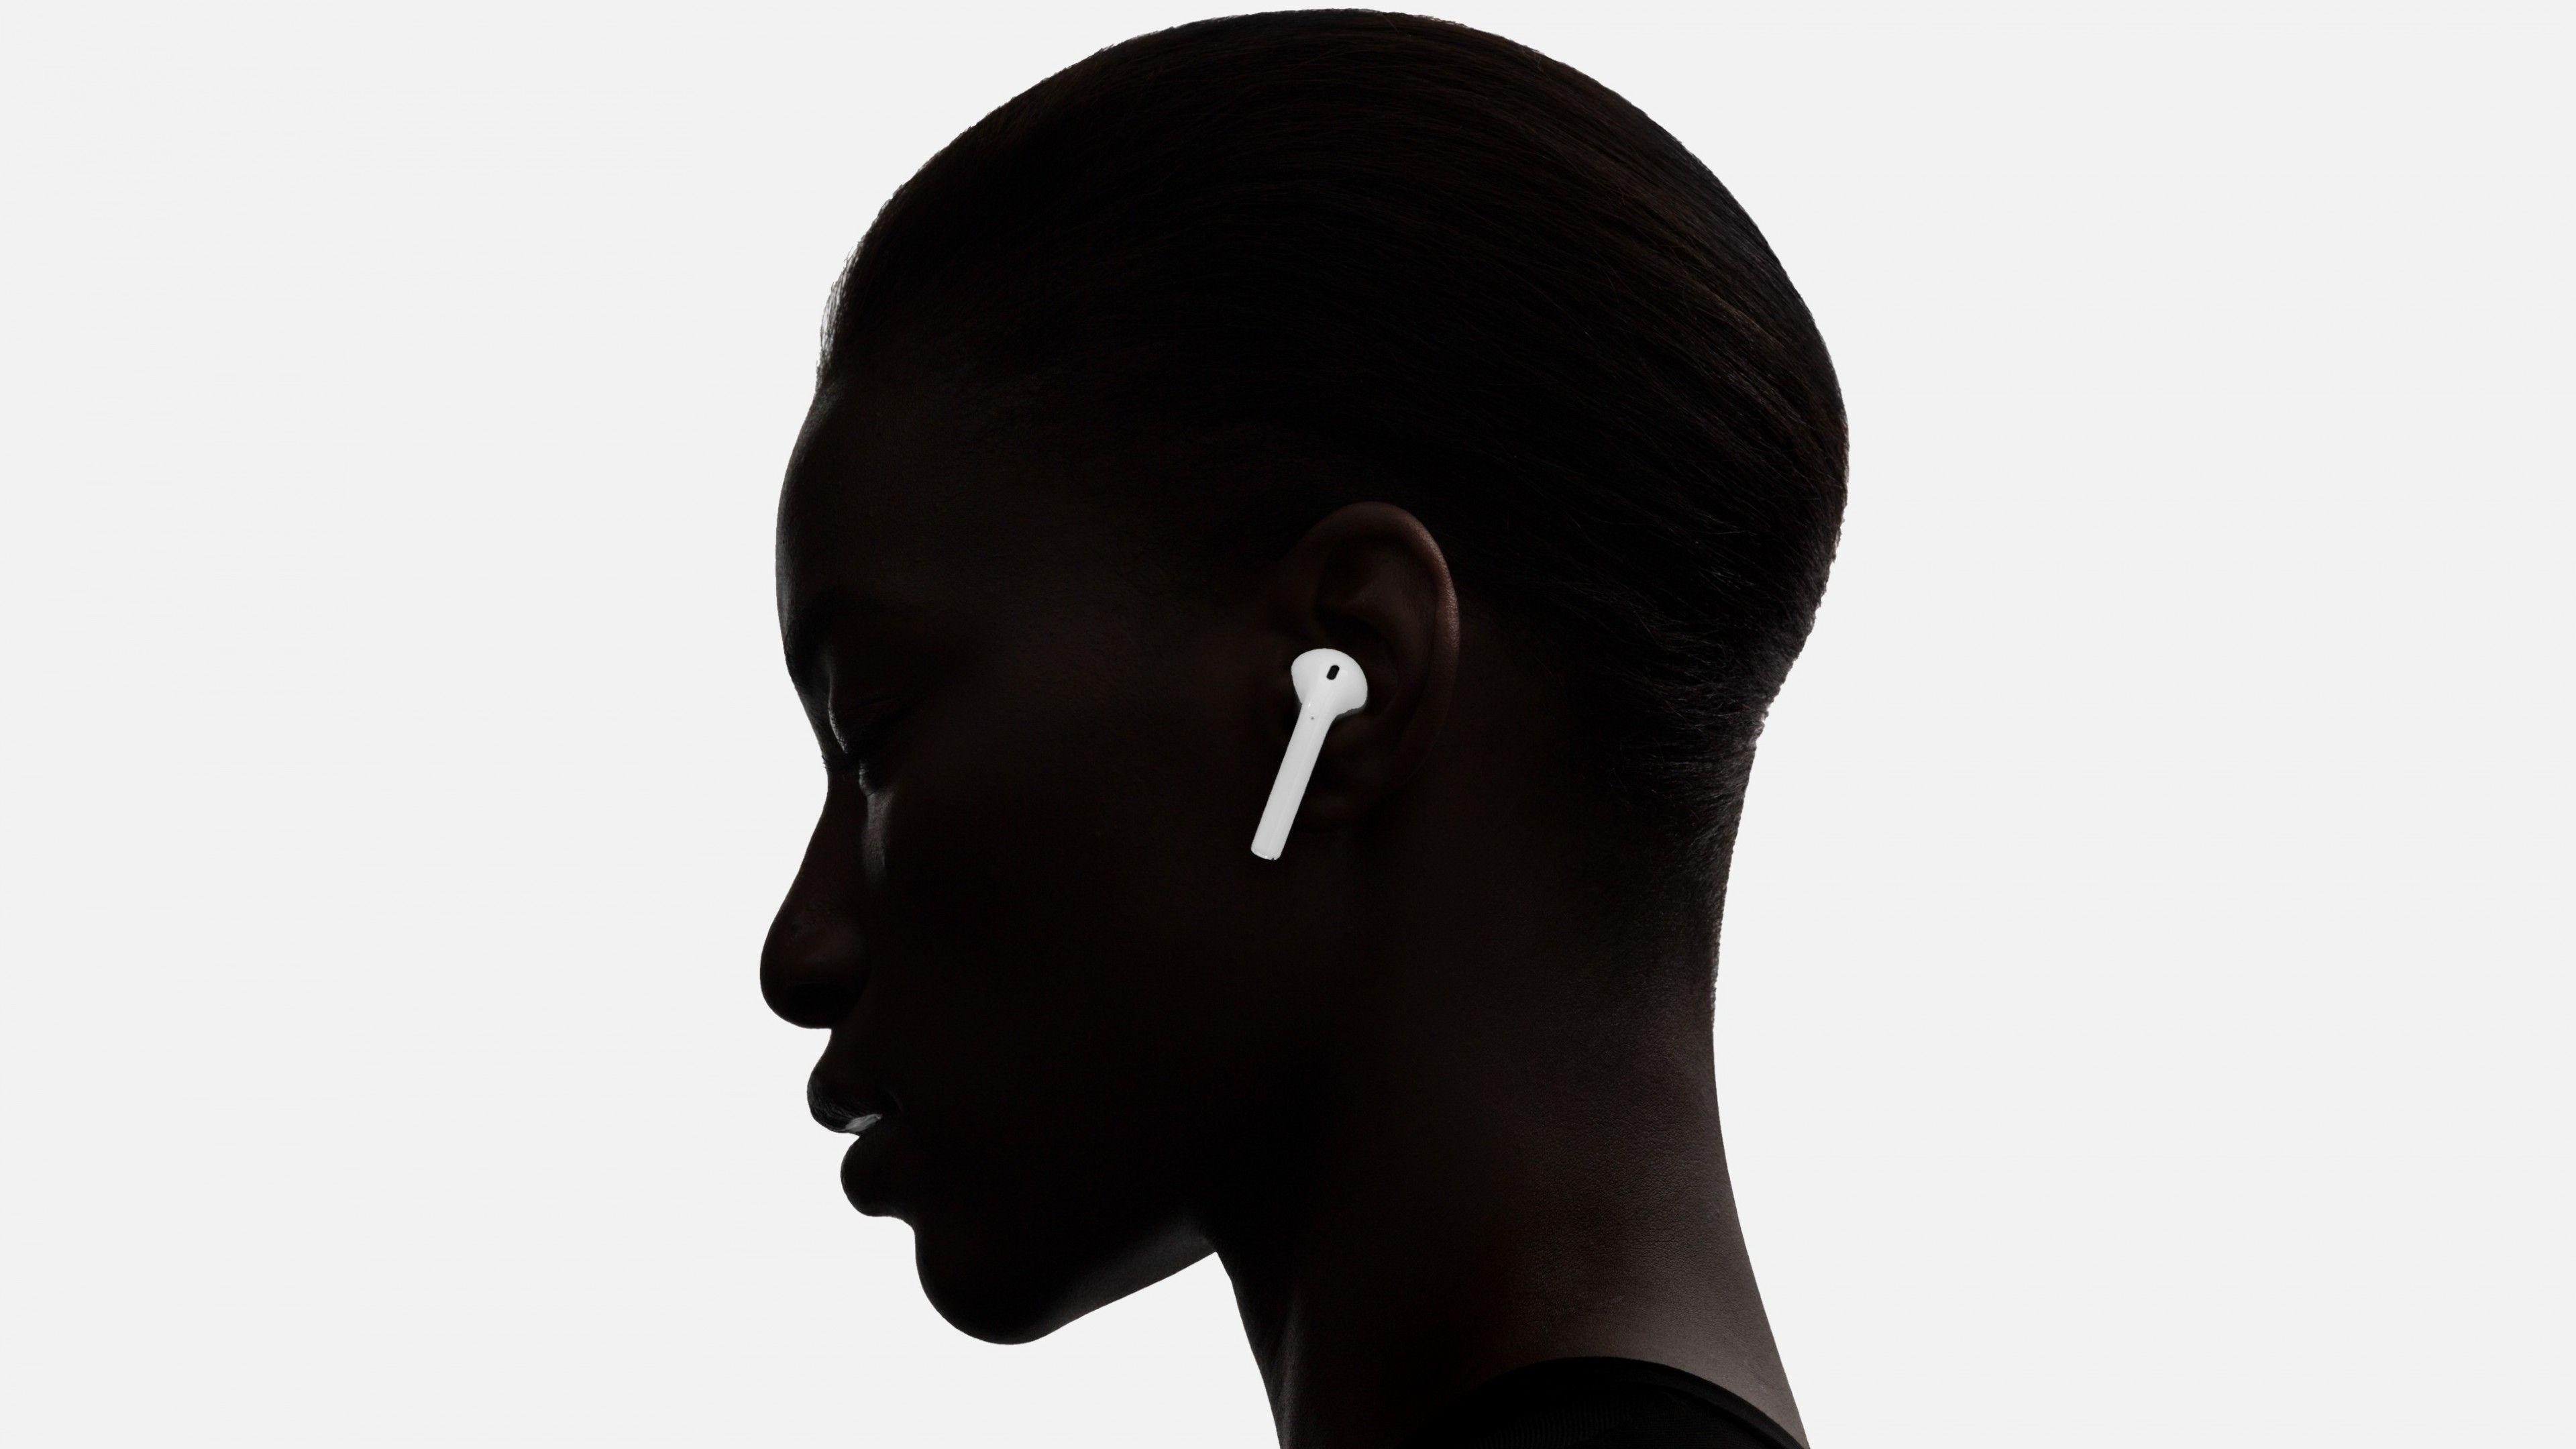 Wallpaper AirPods, iPhone review, woman, headset, wireless, Best